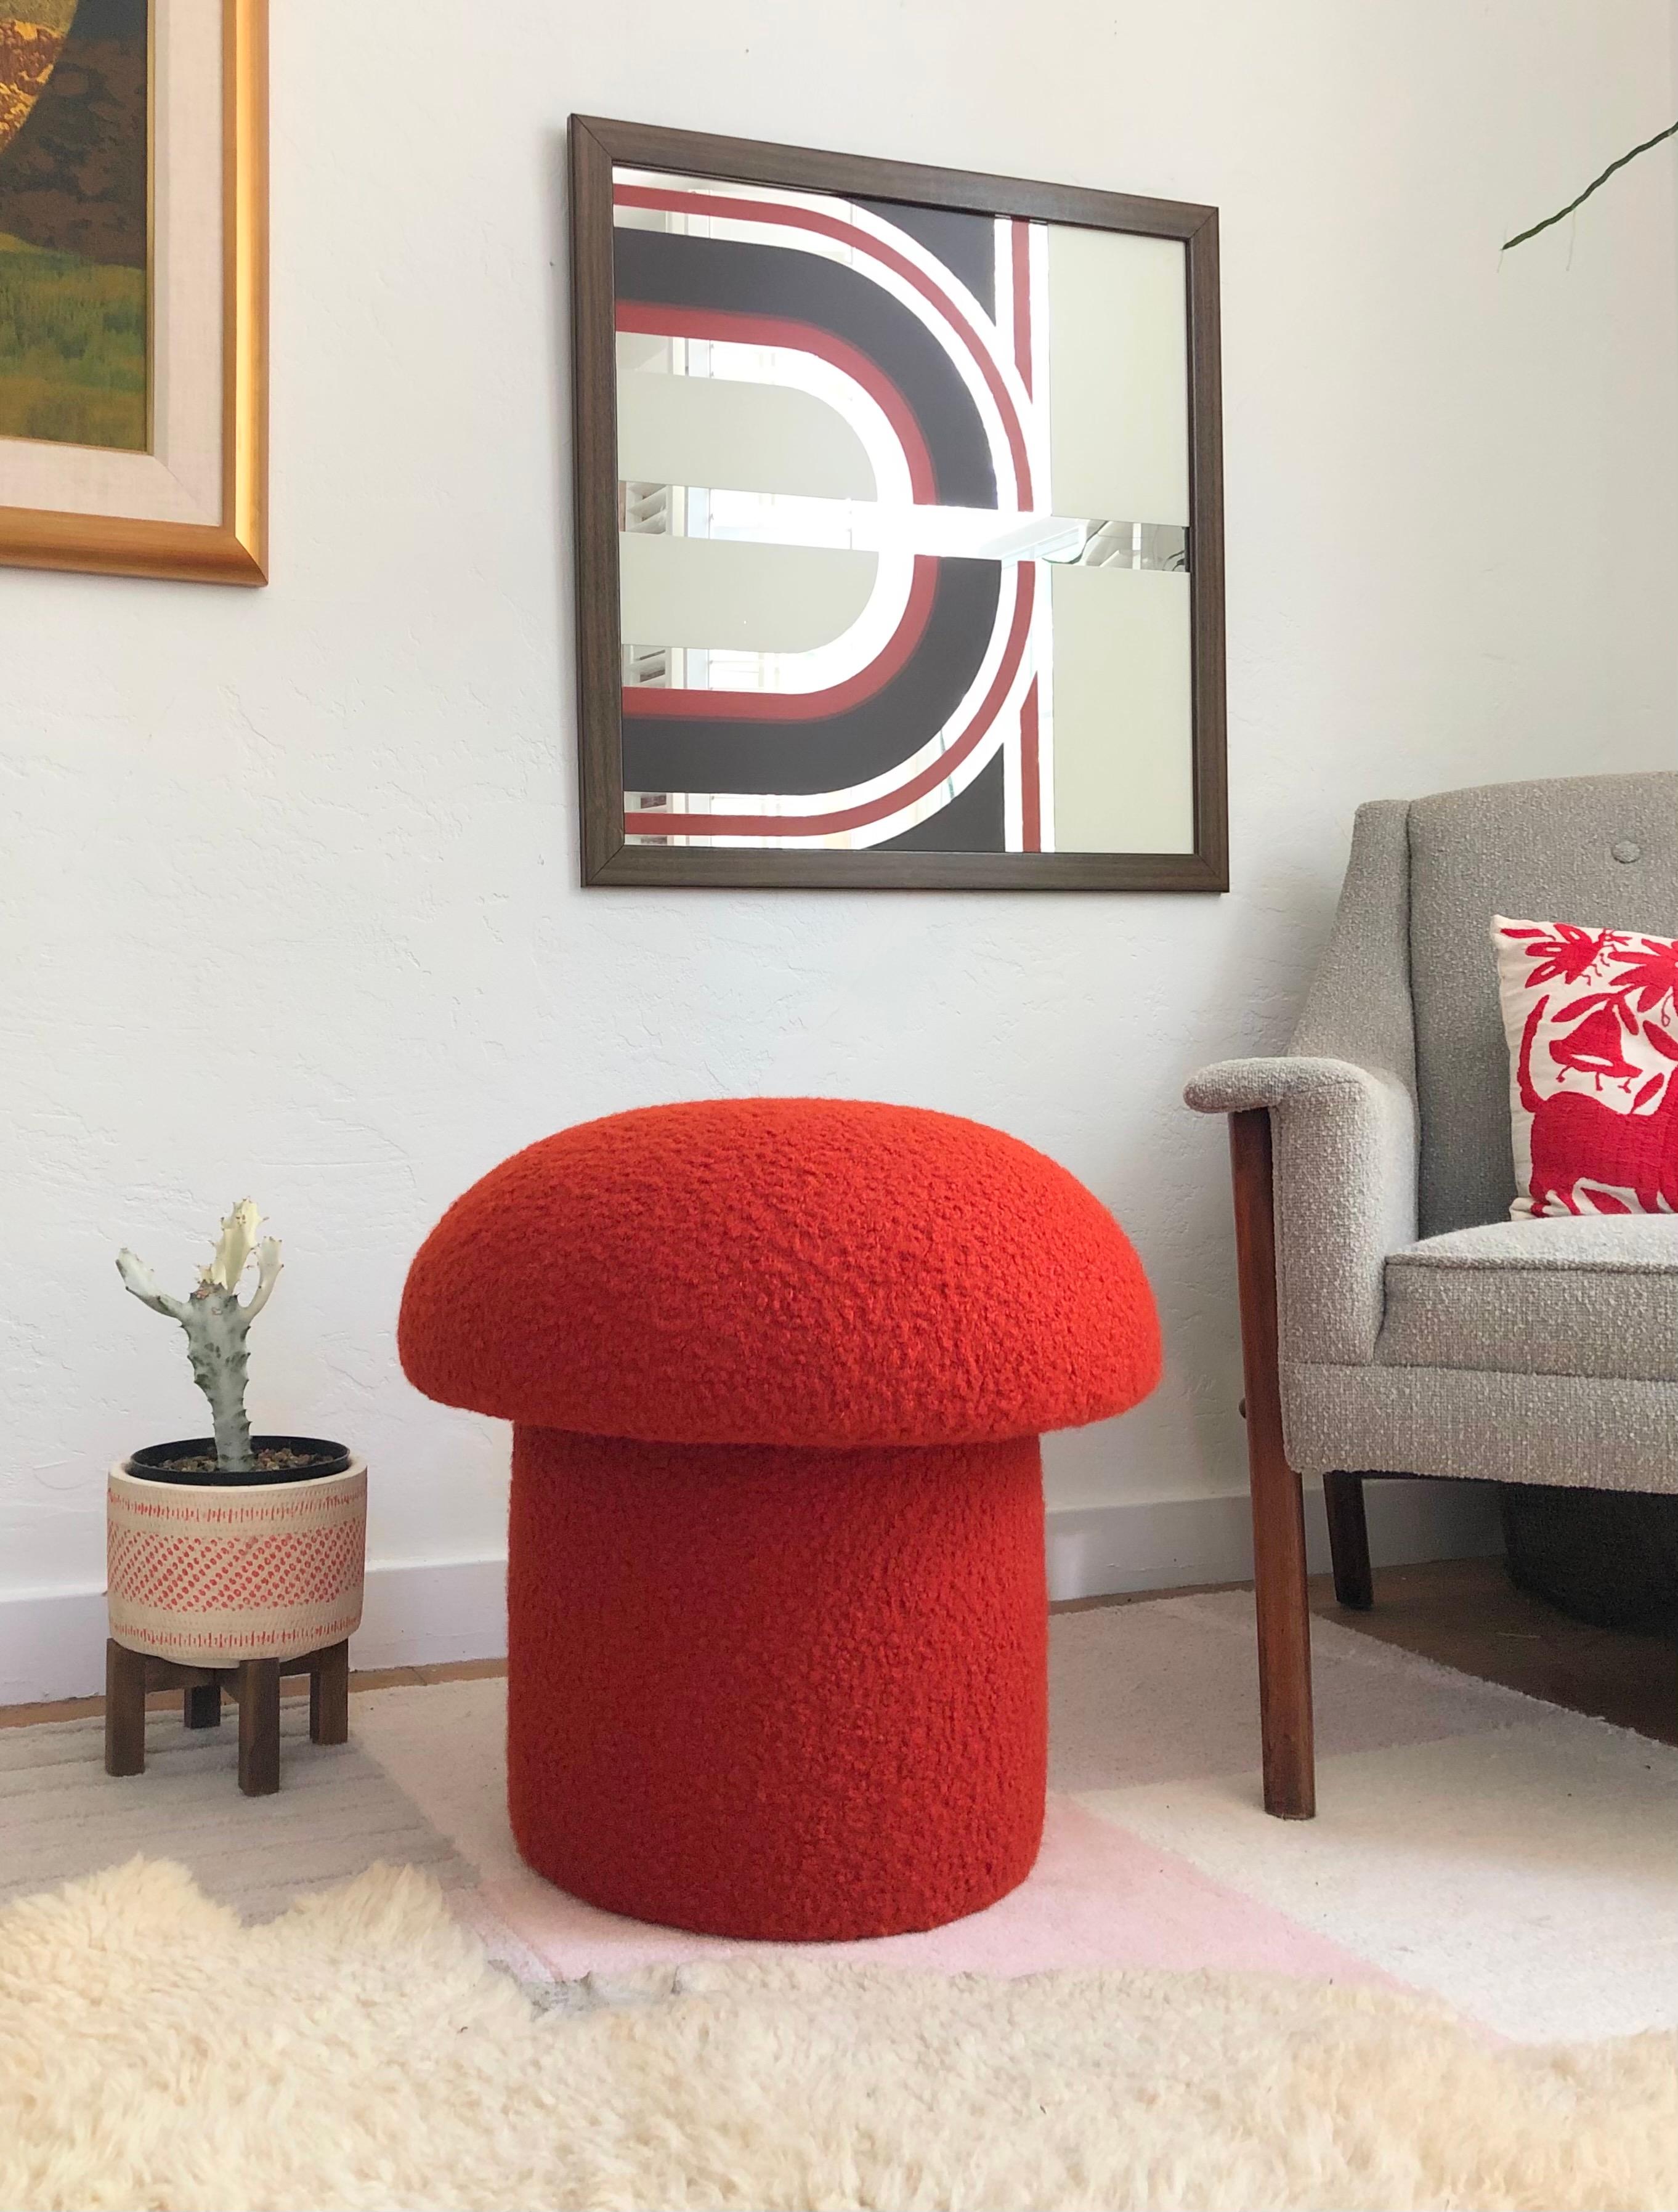 A handmade mushroom shaped ottoman, upholstered in a red-orange colored curly boucle fabric. Perfect for using as a footstool or extra occasional seating. A comfortable cushioned seat and sculptural accent piece.
Mushroom ottomans are made to order,